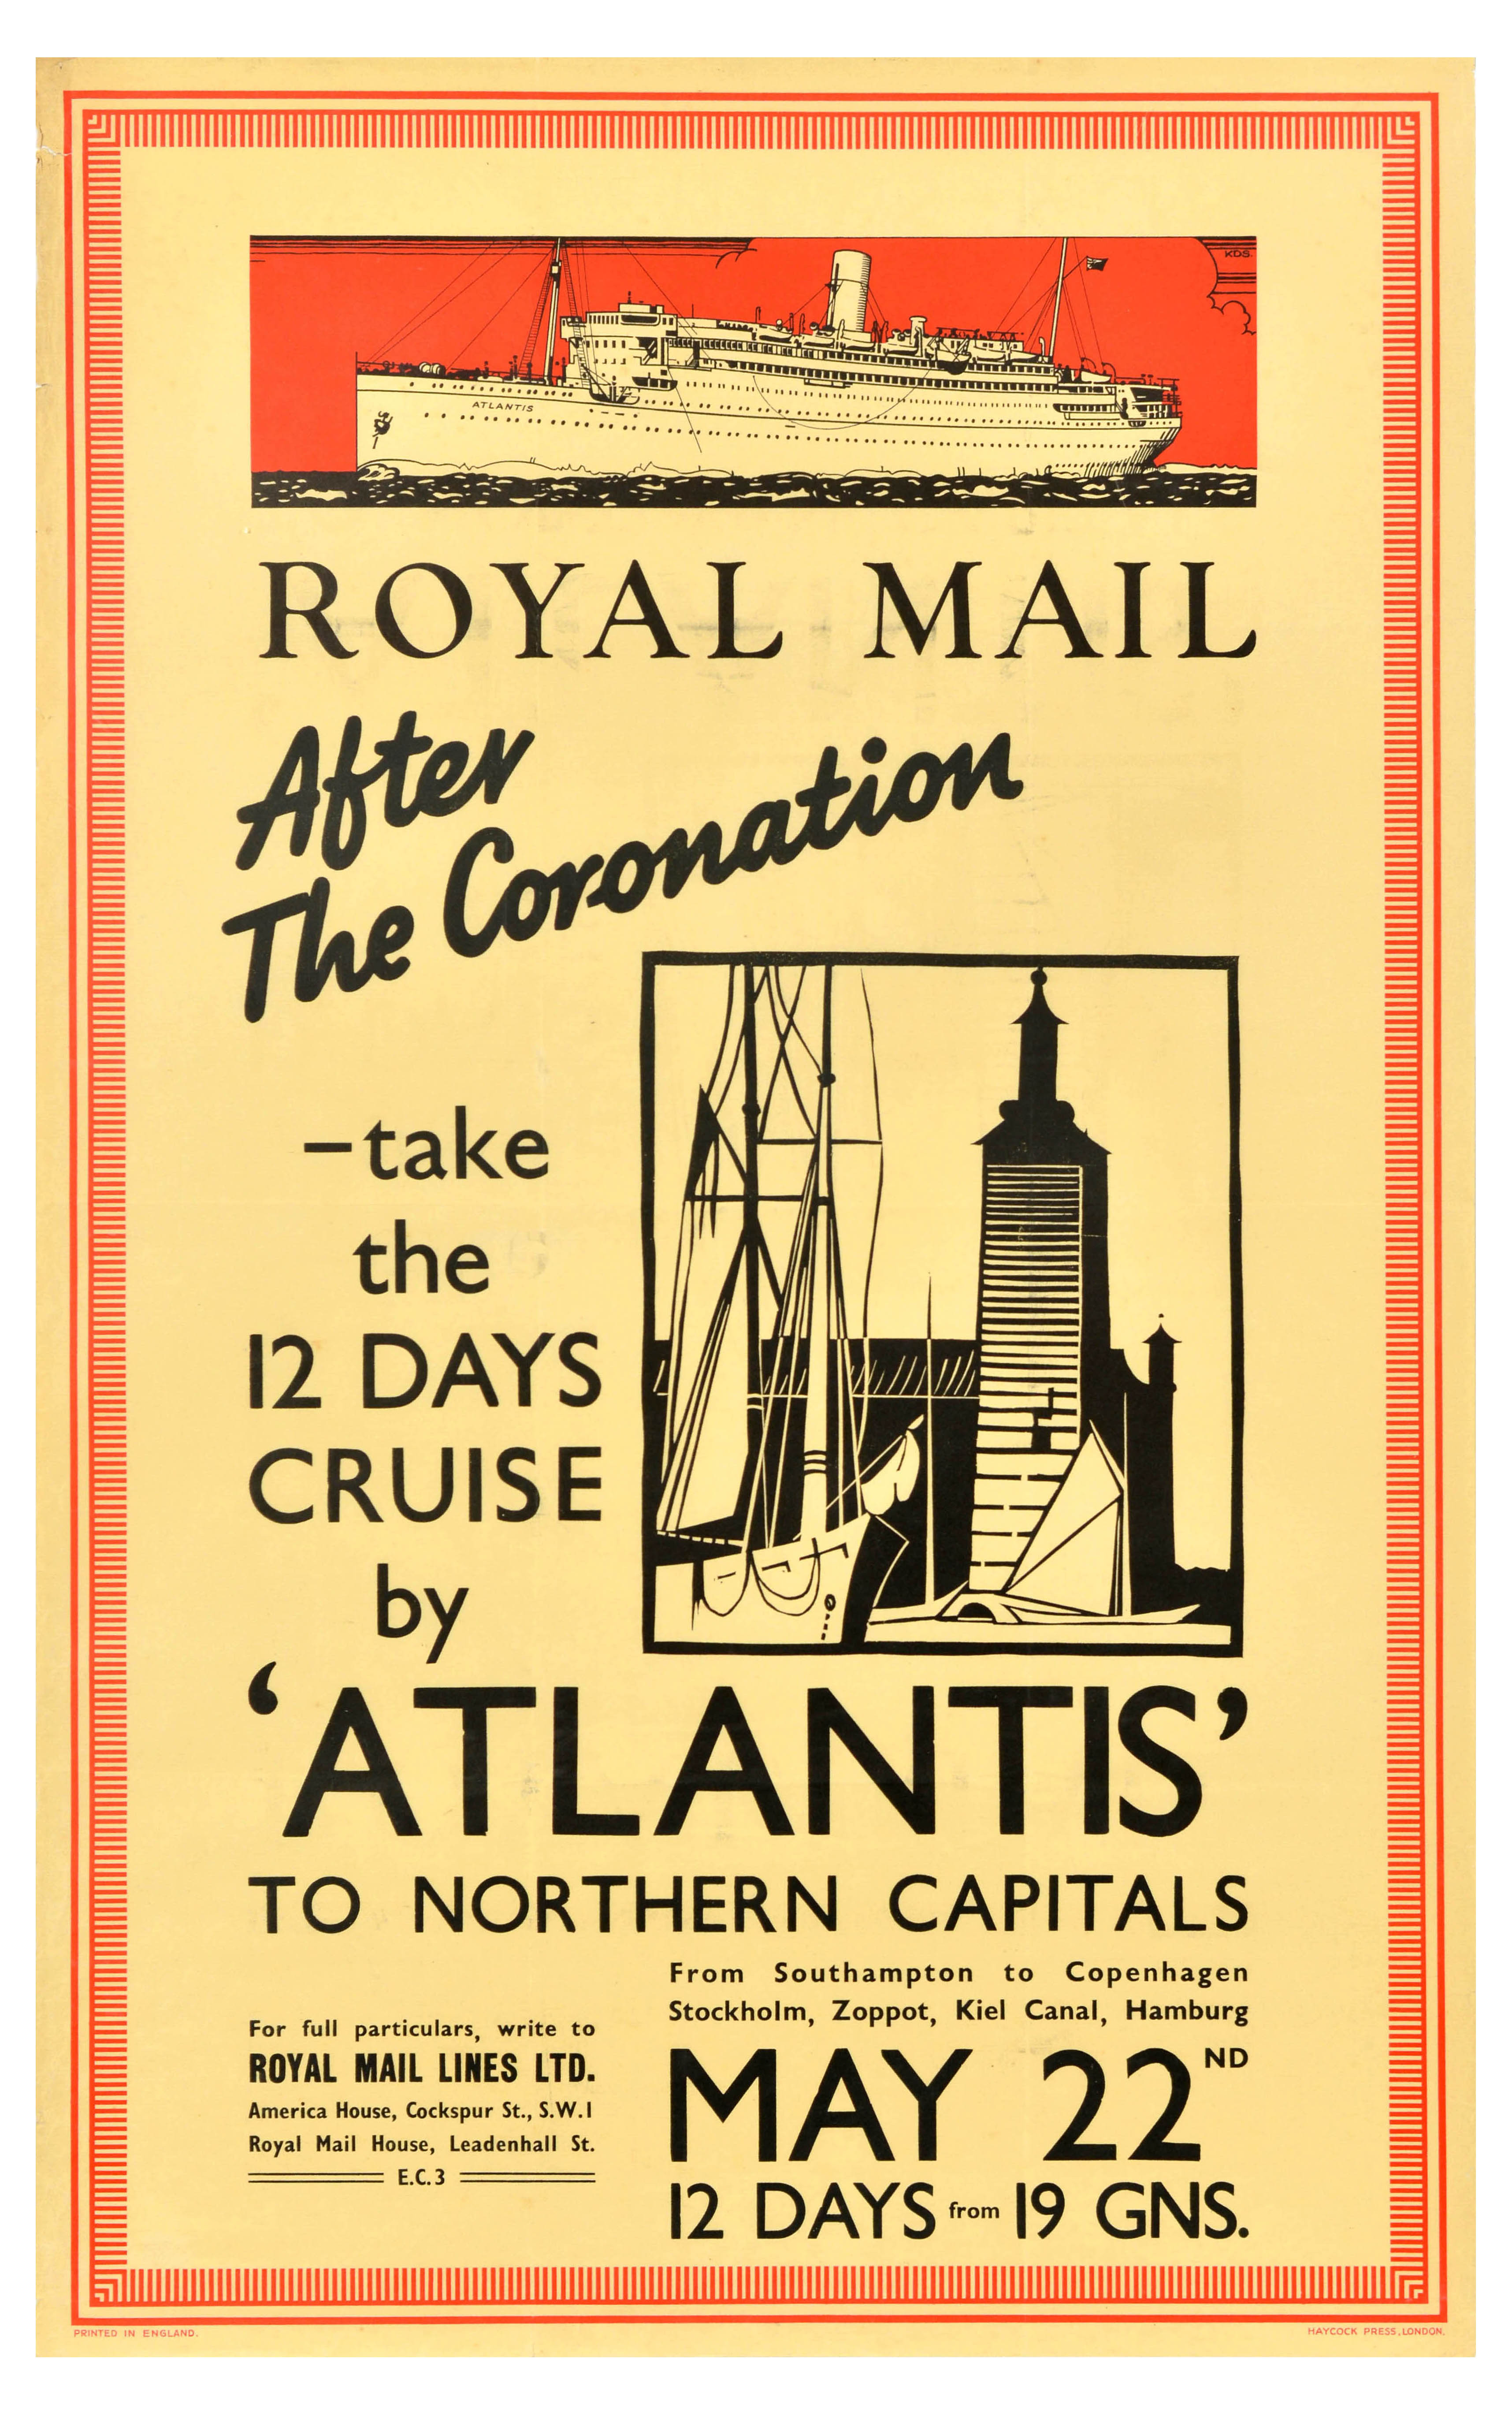 Travel Poster Atlantis Cruise Royal Mail Lines After The Coronation